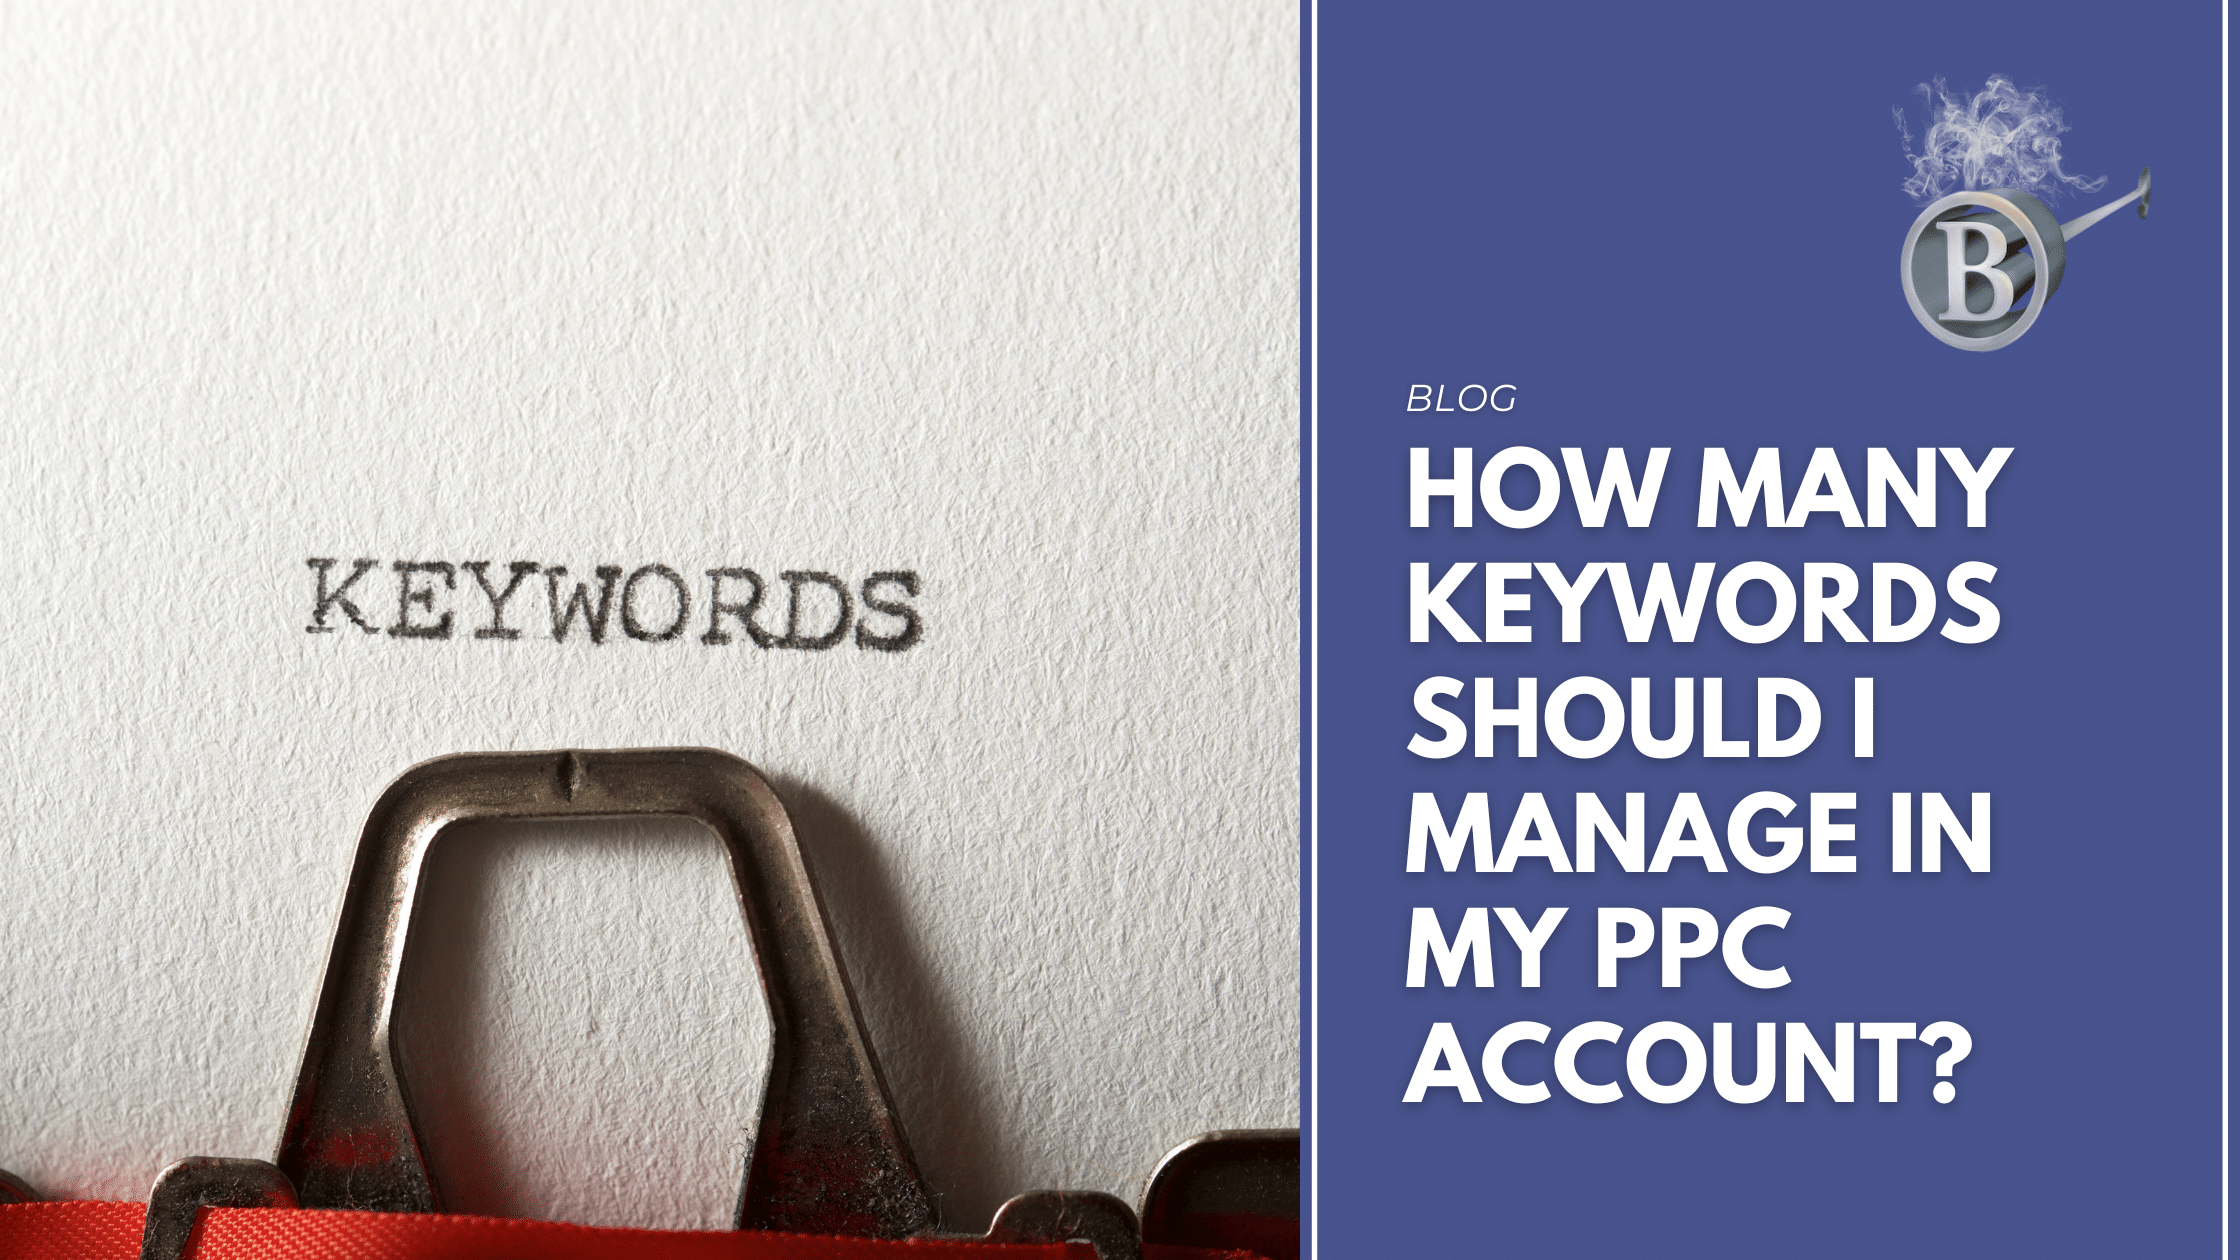 How Many Keywords Should I Manage in My PPC Account?